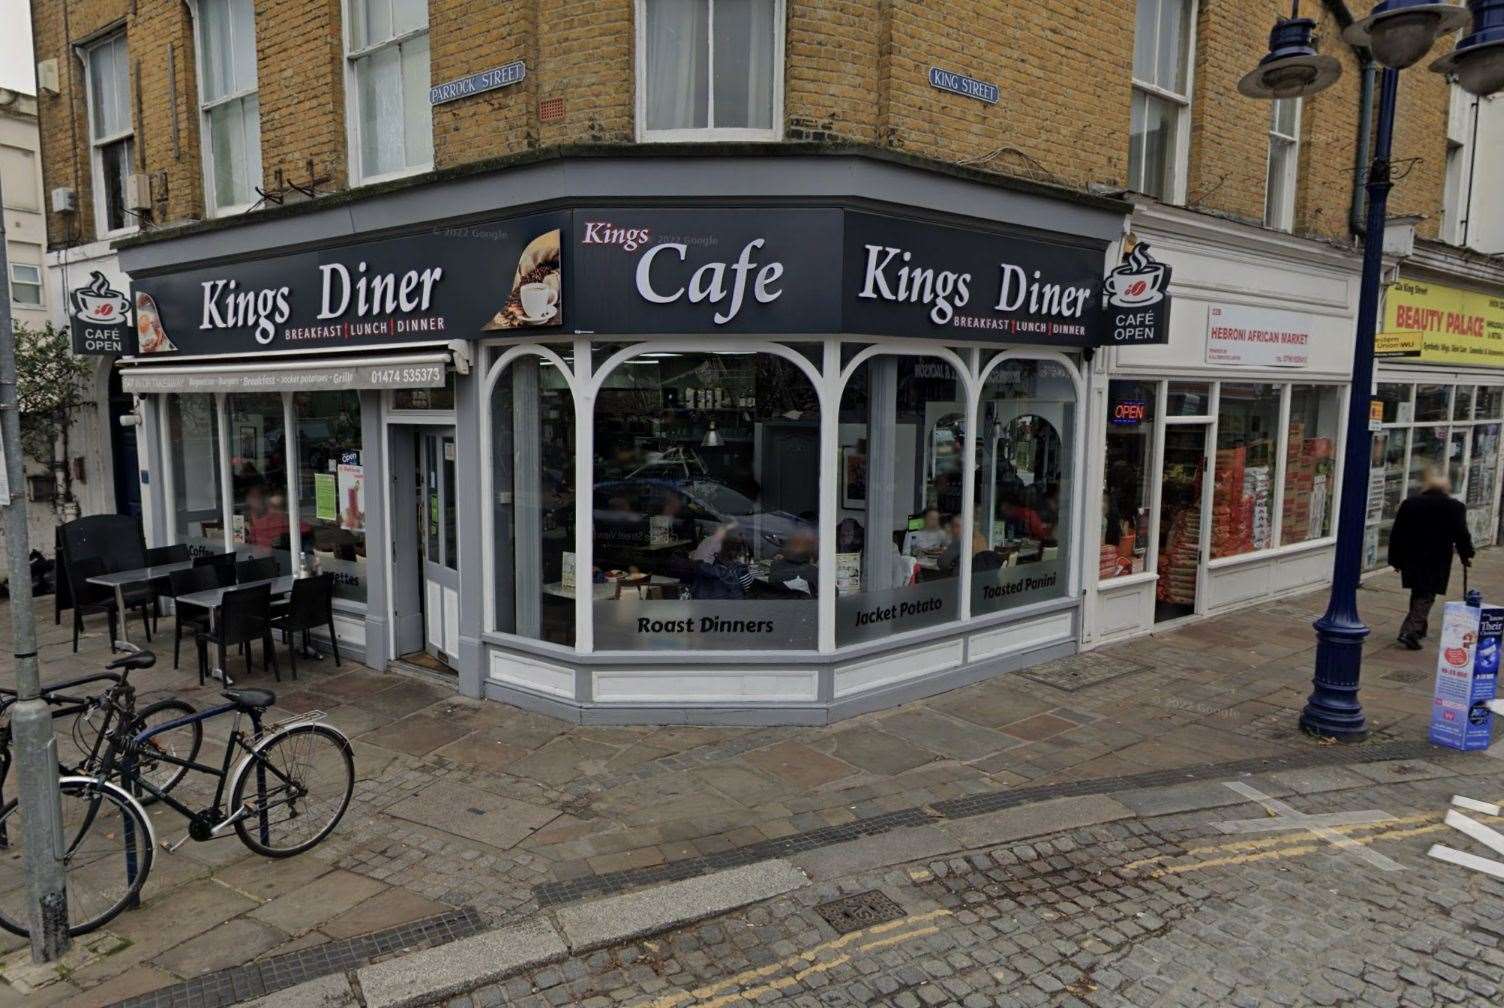 Kings Diner manager Ibrahim Yalmaz says the restaurant’s success is due to its high-quality ingredients. Picture: Google Maps